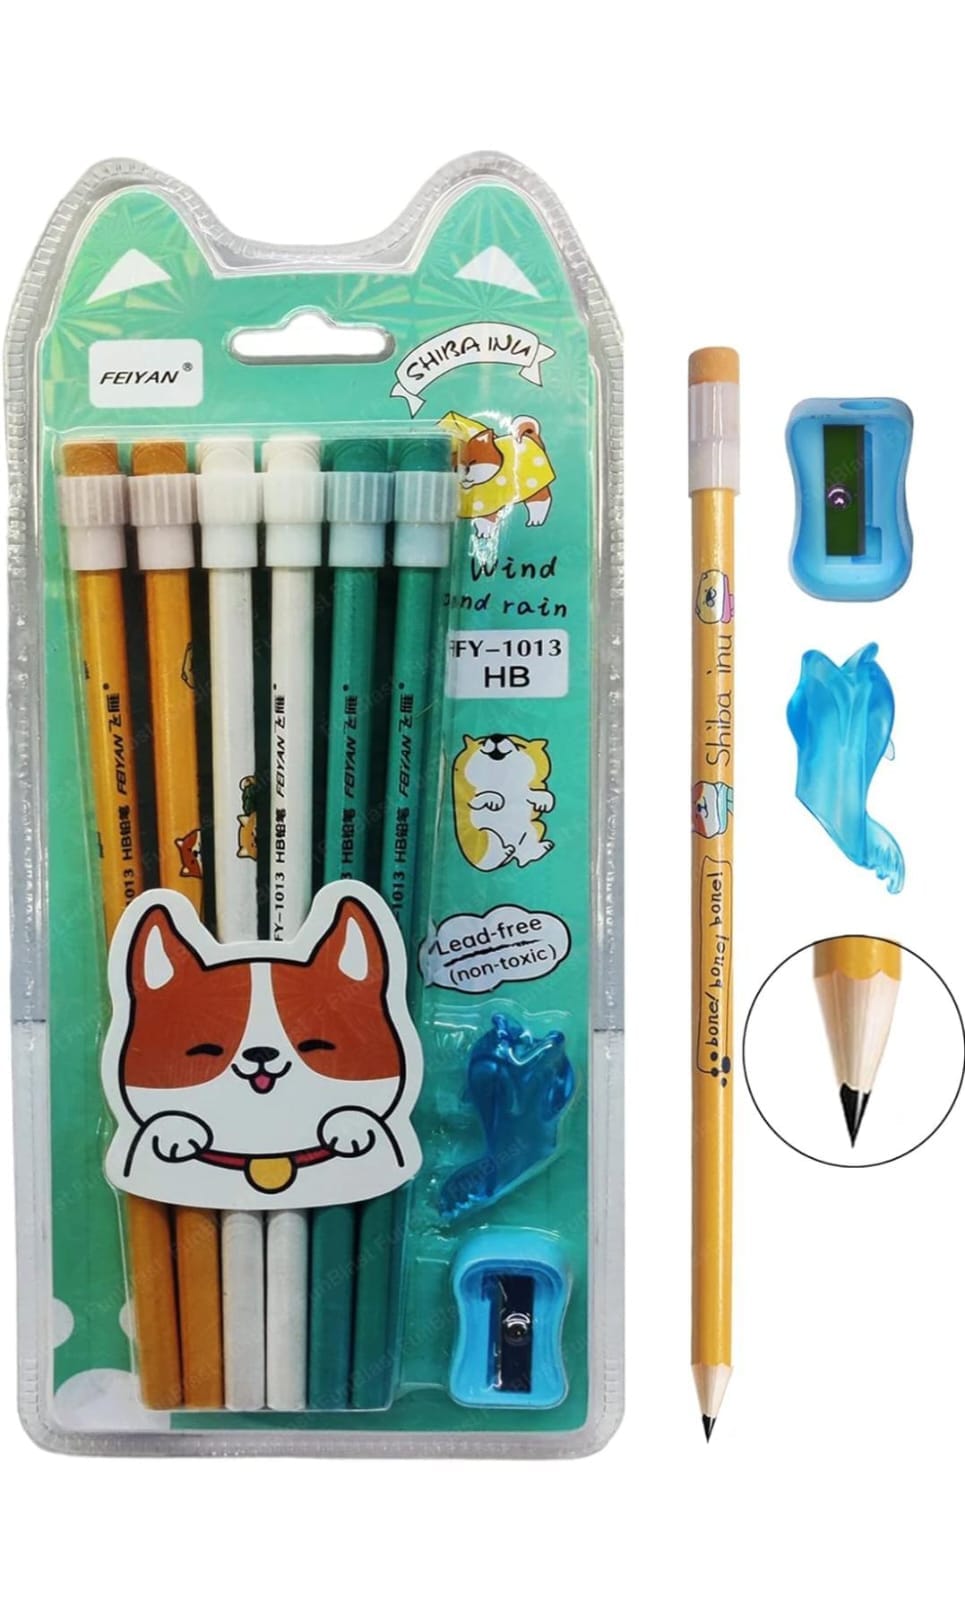 10 pcs Wooden Colored DIY Cute Pencils for Kids,with Pencil Sharpeners,4 in  1 Color Pencil Set for Drawing, Coloring, Sketching Drawing Stationery